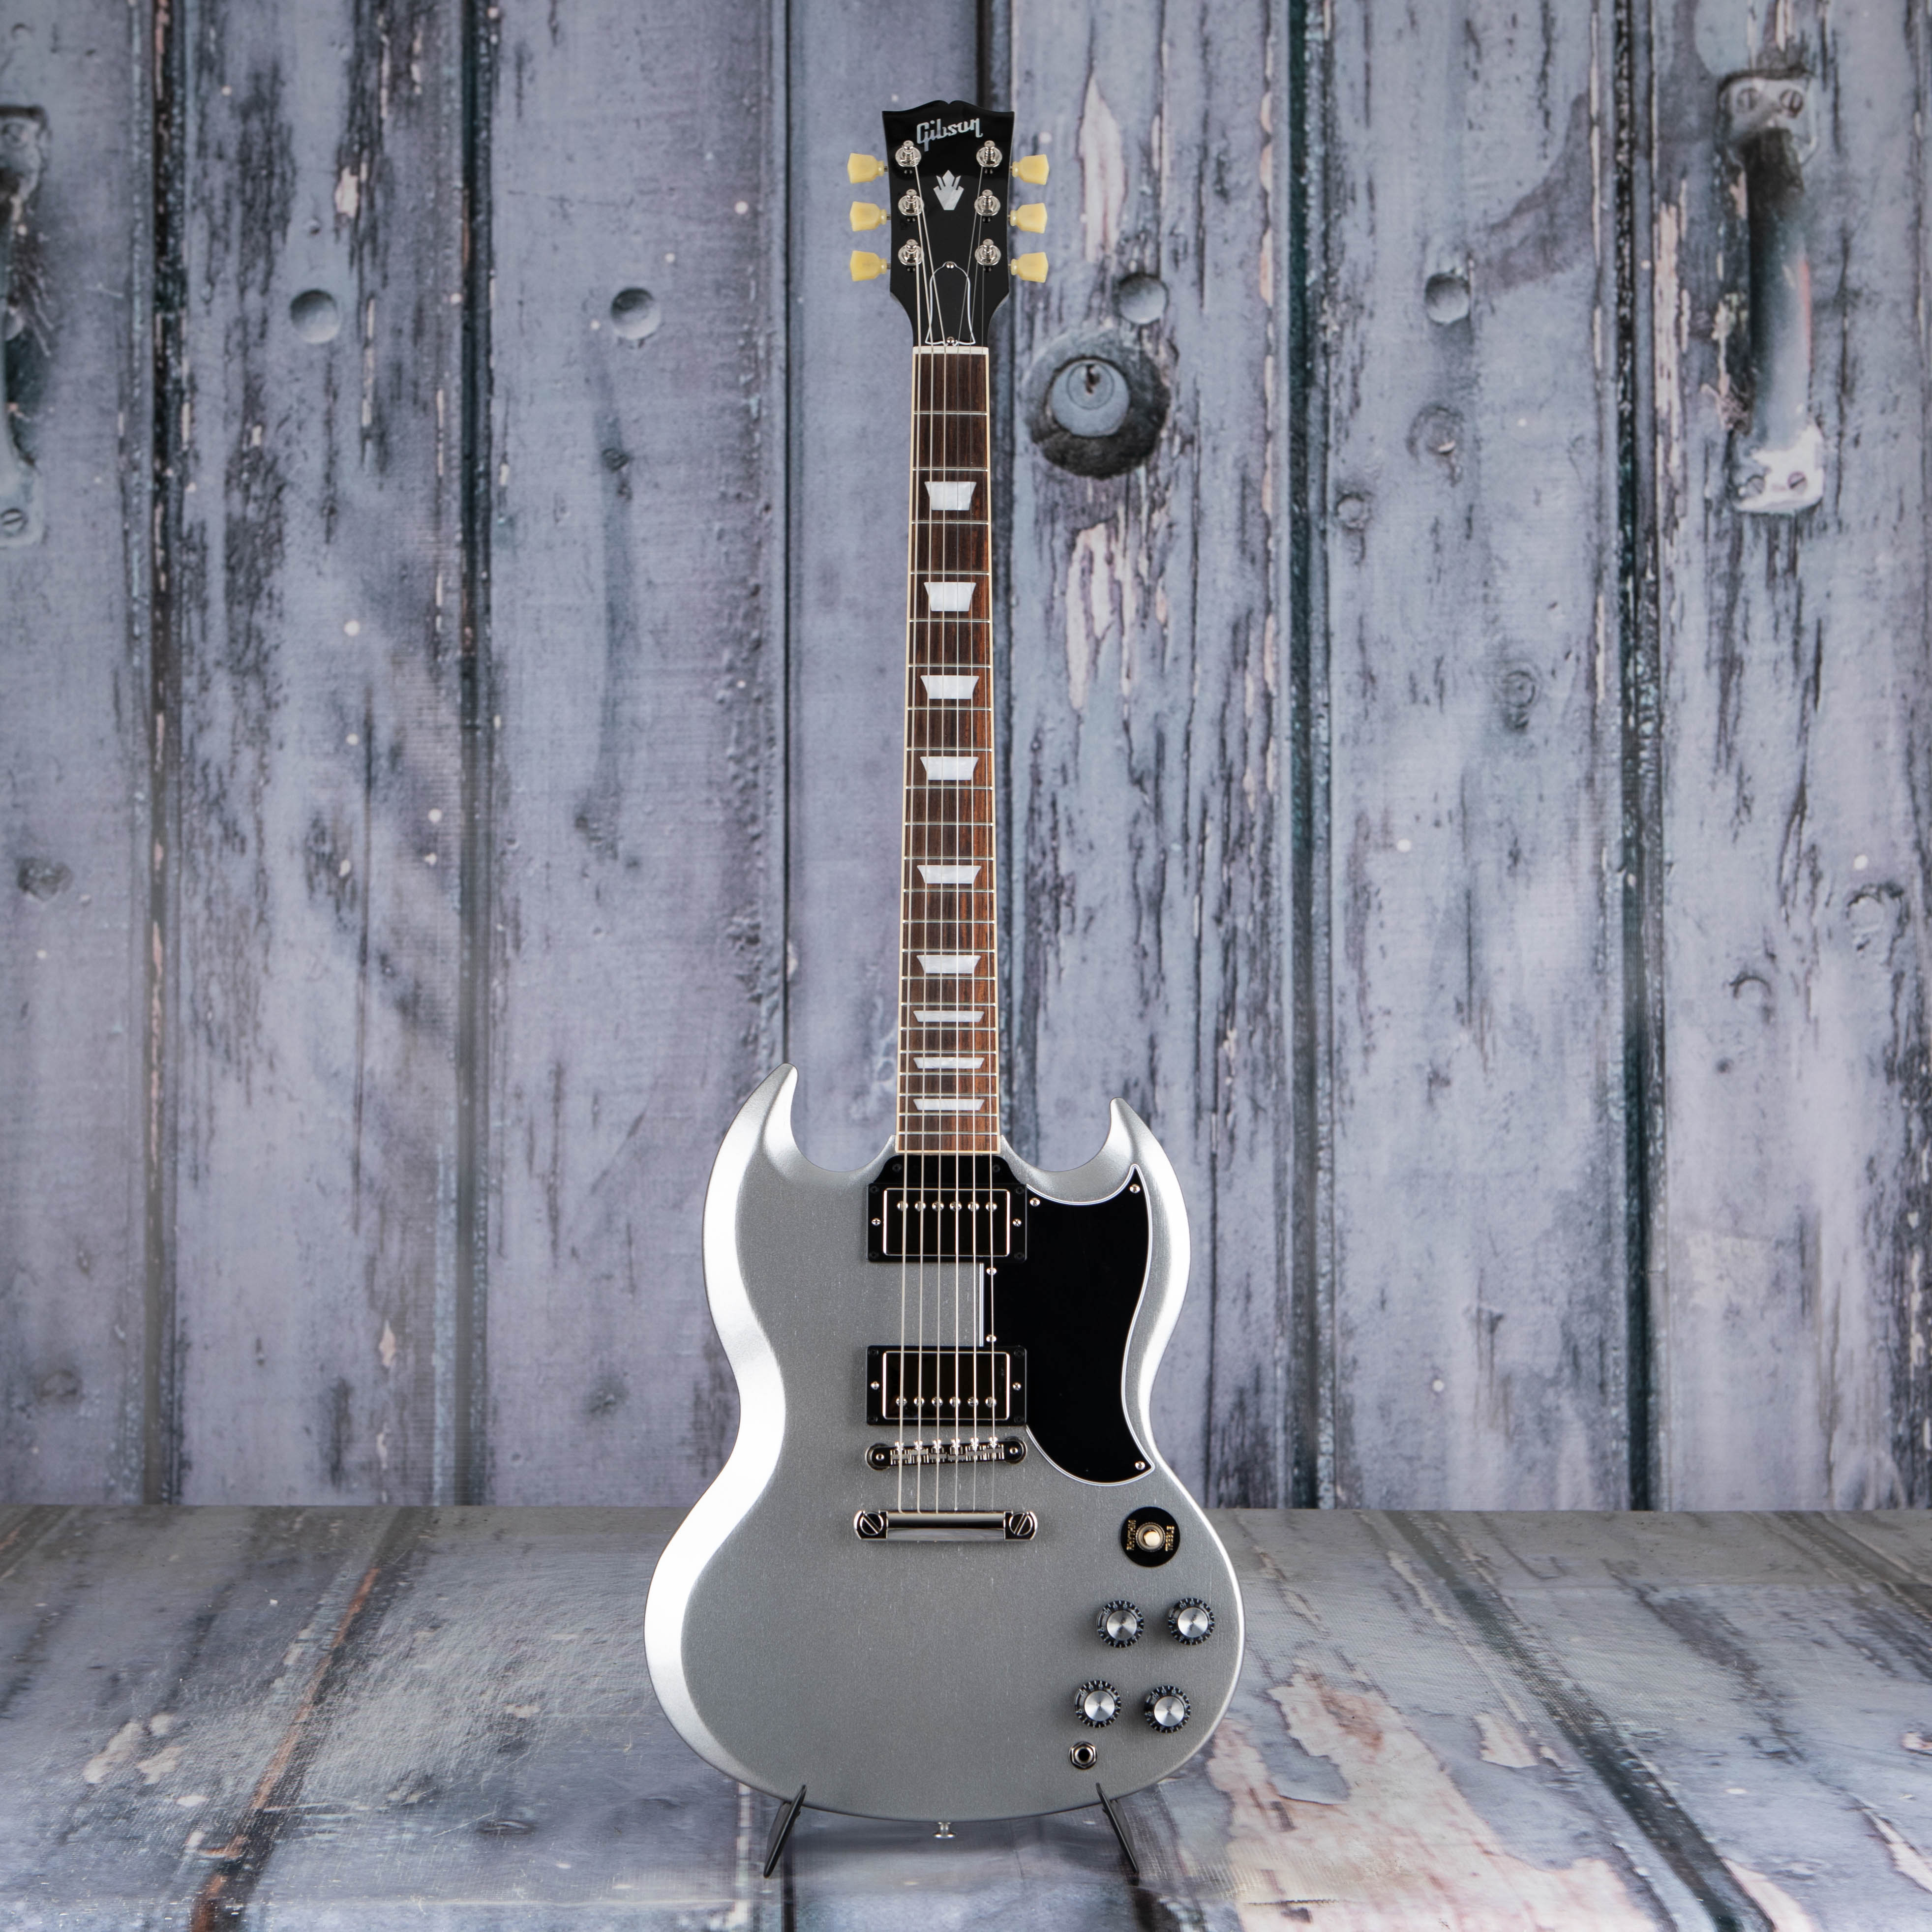 Gibson USA SG Standard '61 Electric Guitar, Silver Mist, front